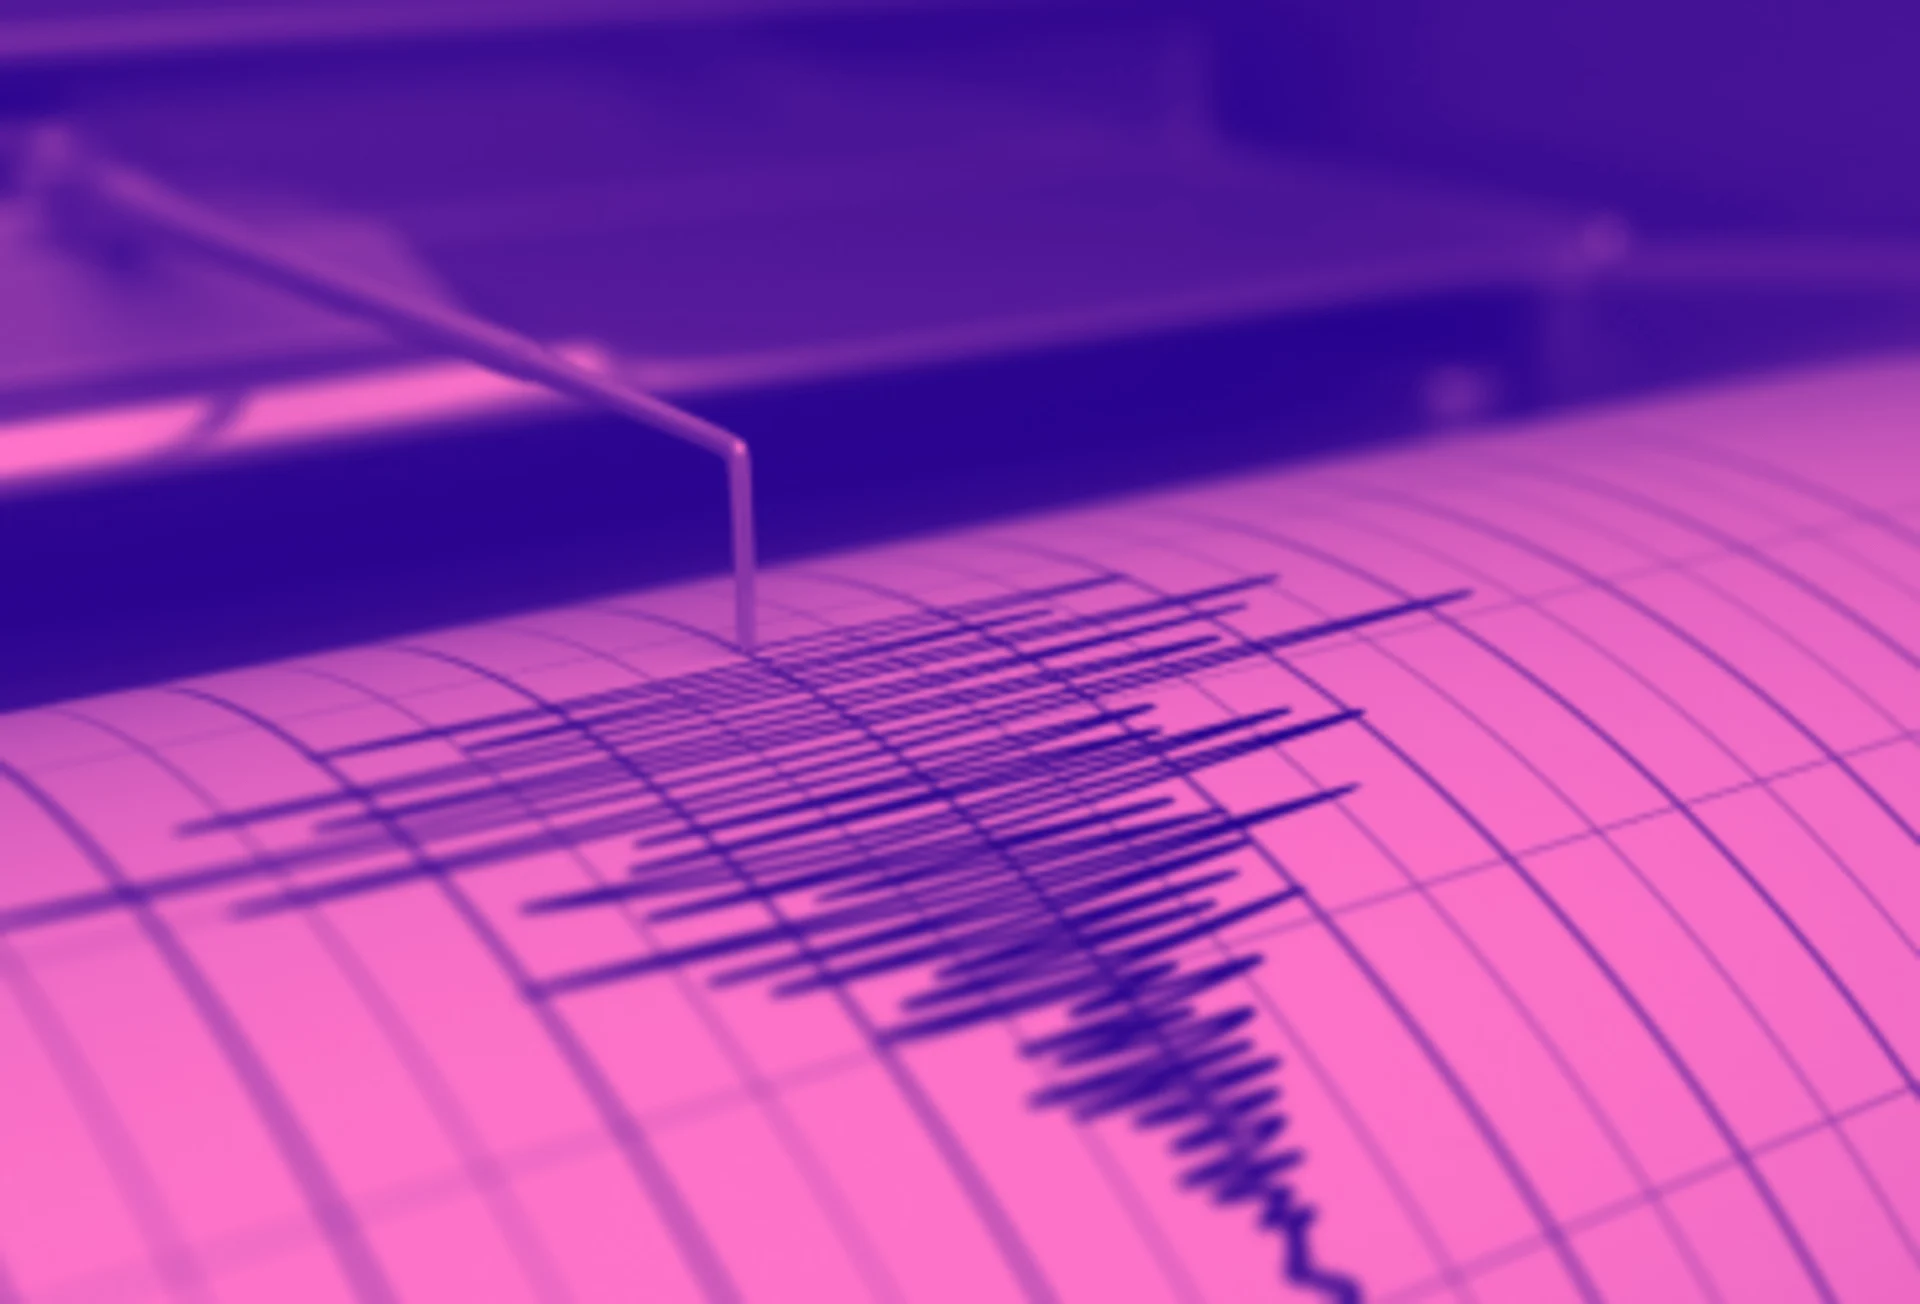 Moderate earthquake reported east of Peace River, Alberta, Thursday morning